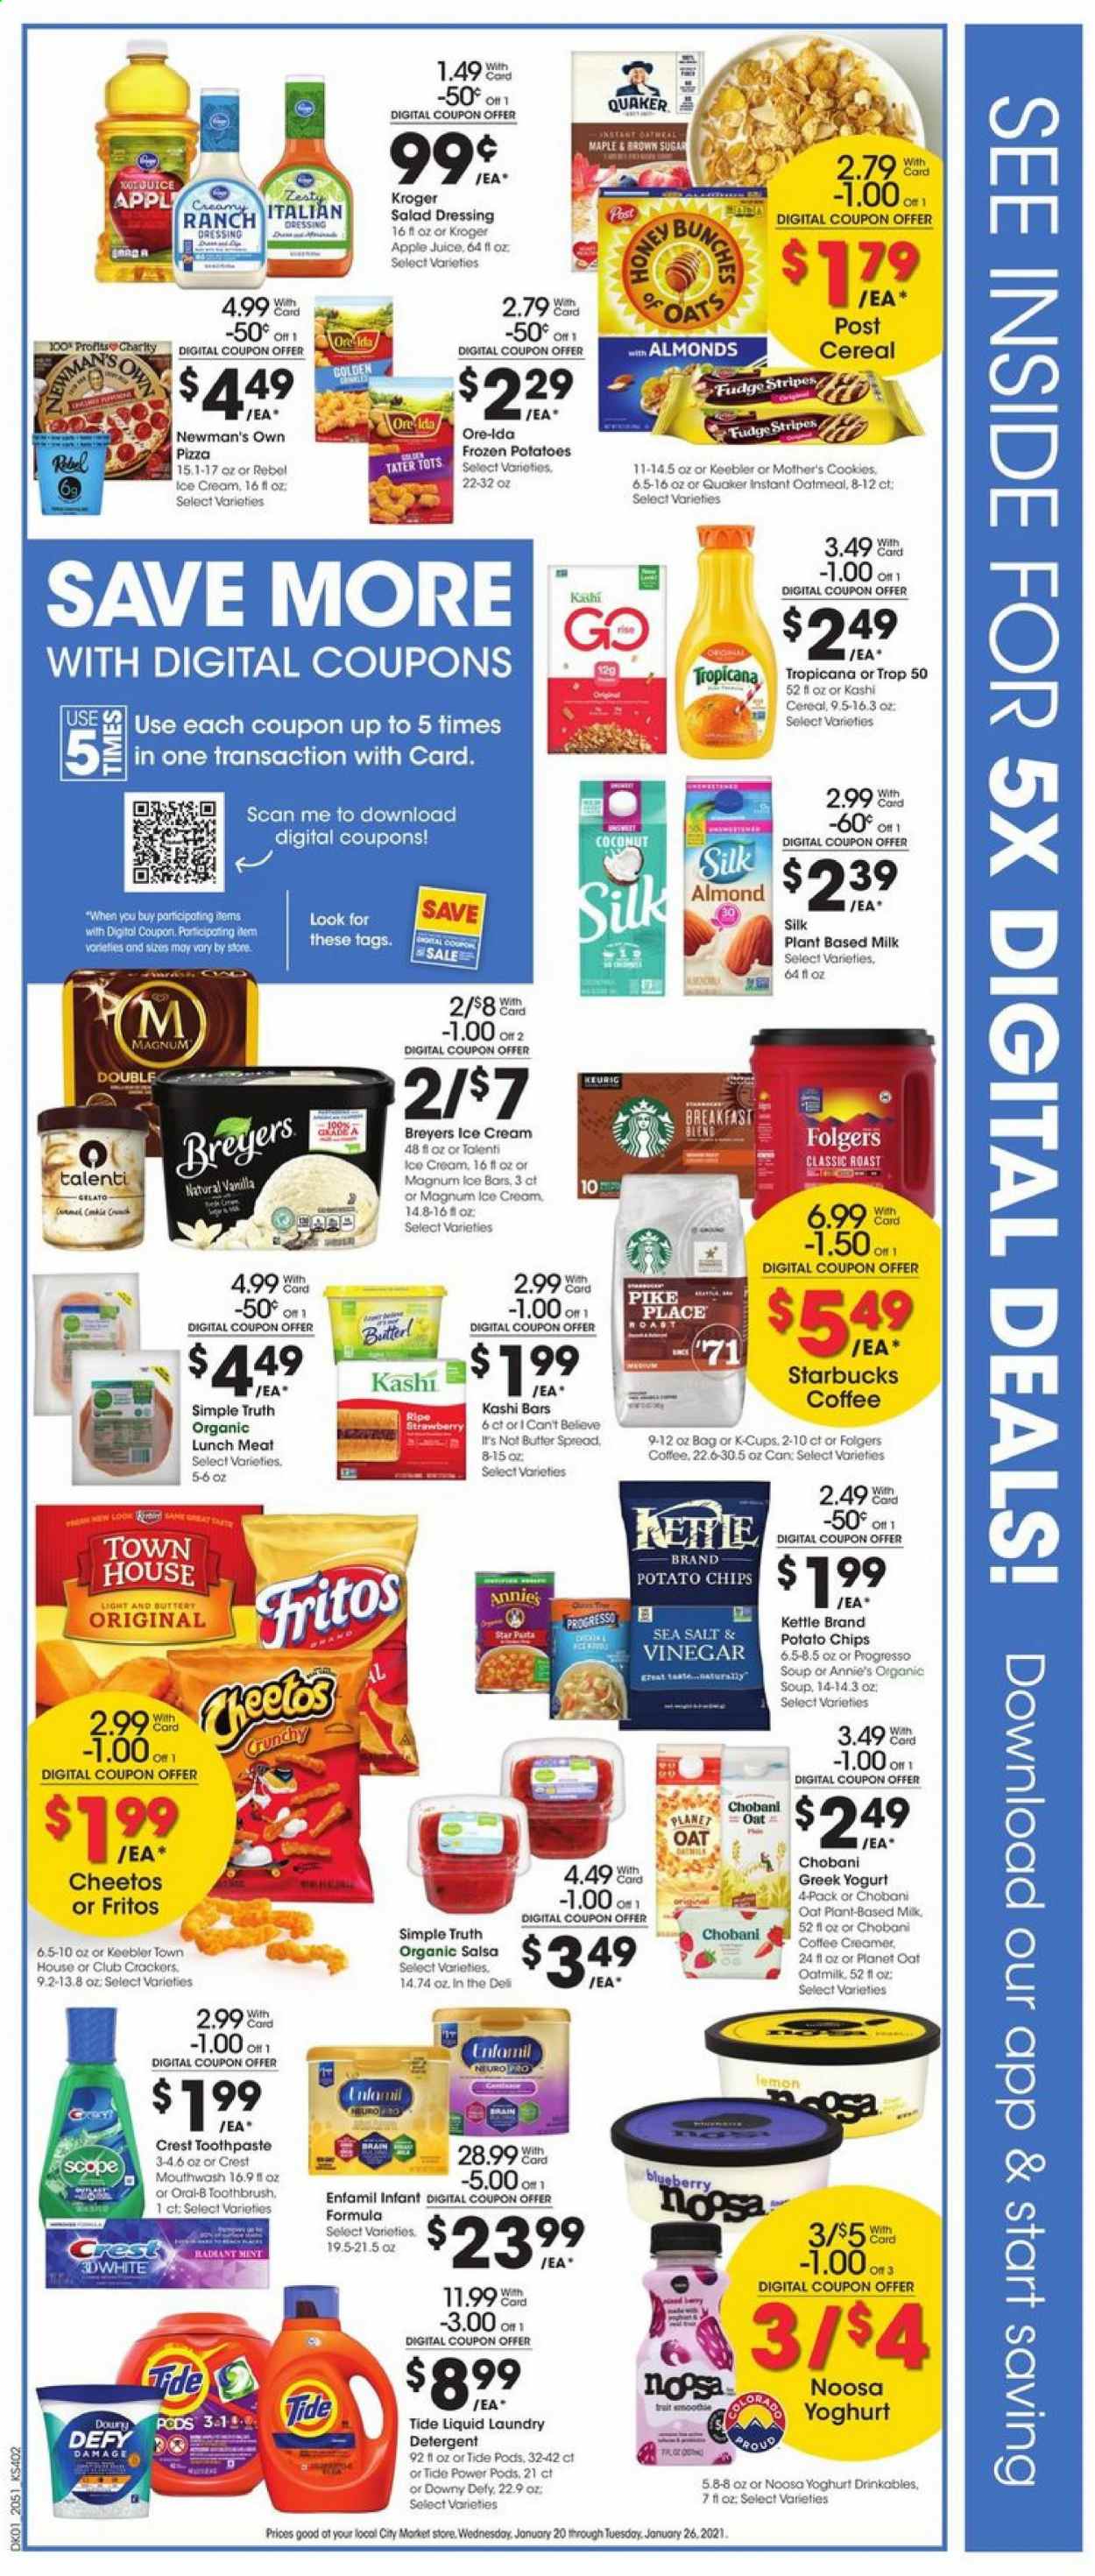 thumbnail - City Market Flyer - 01/20/2021 - 01/26/2021 - Sales products - coconut, pizza, Quaker, Progresso, Annie's, lunch meat, greek yoghurt, yoghurt, Chobani, milk, oat milk, butter, creamer, coffee and tea creamer, italian dressing, salsa, ice cream, Talenti Gelato, Ore-Ida, cookies, fudge, crackers, Keebler, potato chips, Cheetos, oatmeal, oats, sea salt, cereals, Fritos, pasta, salad dressing, dressing, apple juice, juice, Starbucks, Folgers, coffee capsules, K-Cups, Keurig, Enfamil, detergent, Tide, laundry detergent, toothbrush, Oral-B, toothpaste, mouthwash, Crest, bunches. Page 2.